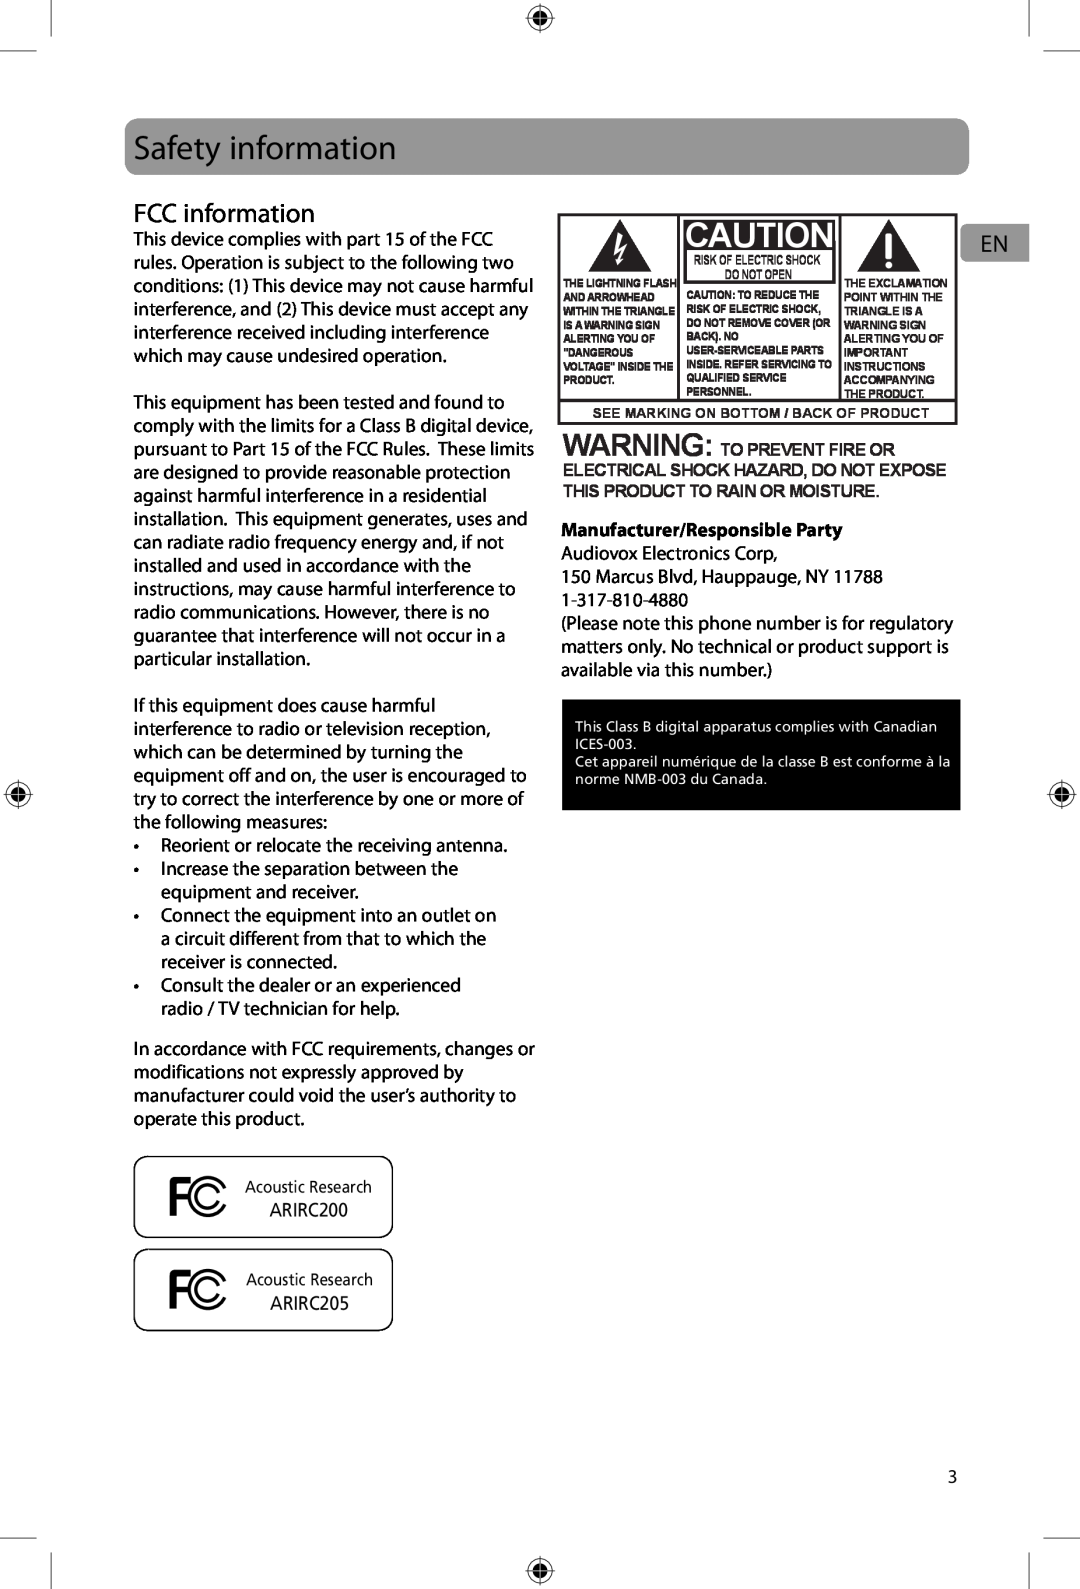 Acoustic Research ARIRC200, ARIRC205 user manual Safety information, FCC information, Manufacturer/Responsible Party 